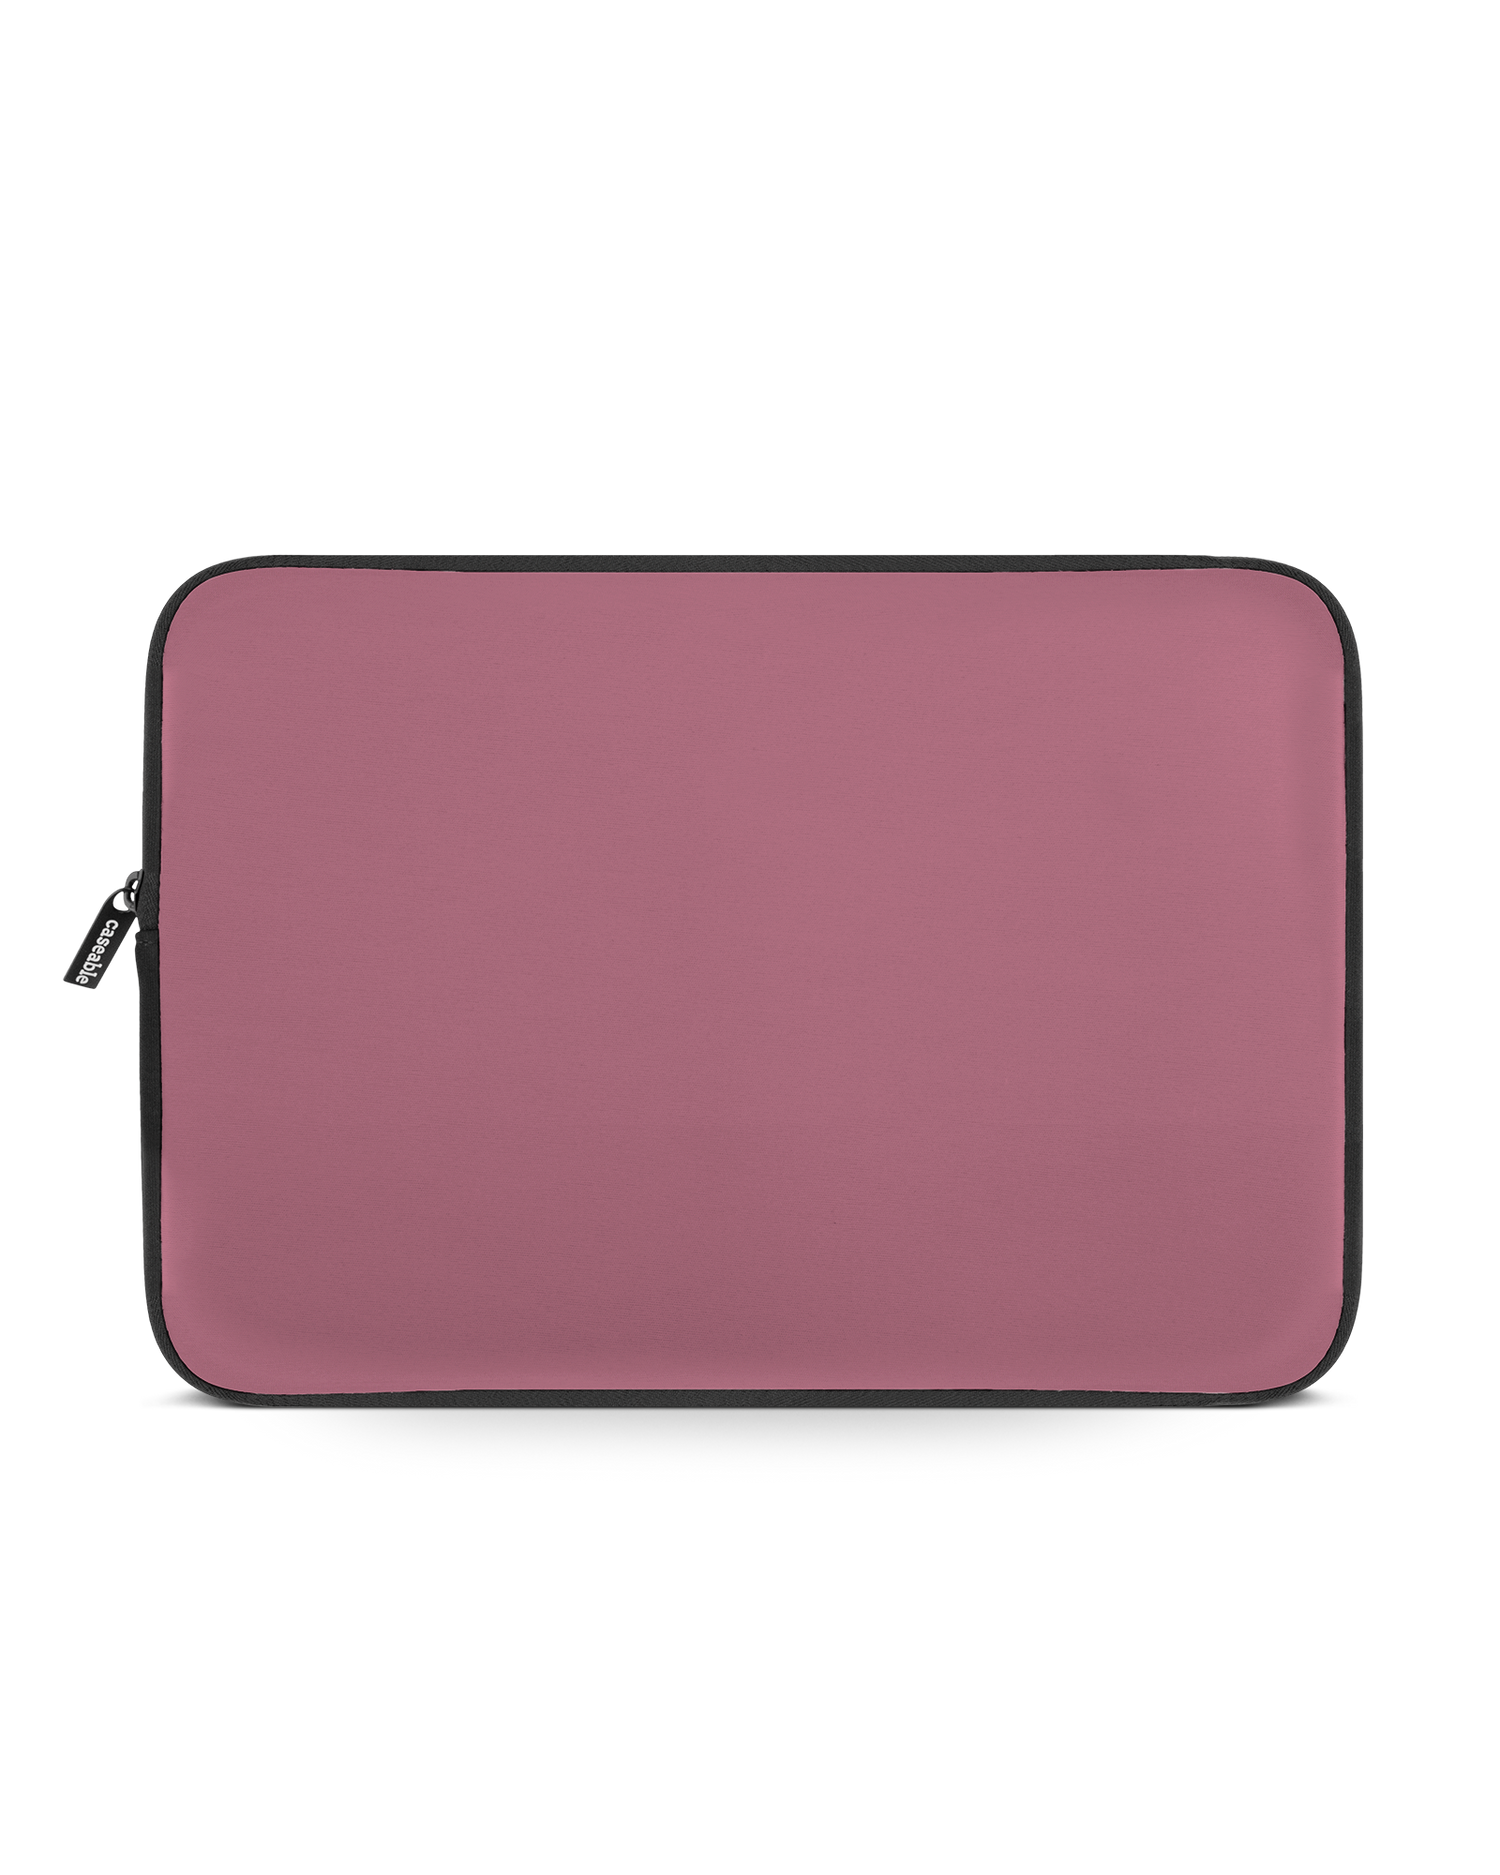 WILD ROSE Laptop Case 14 inch: Front View